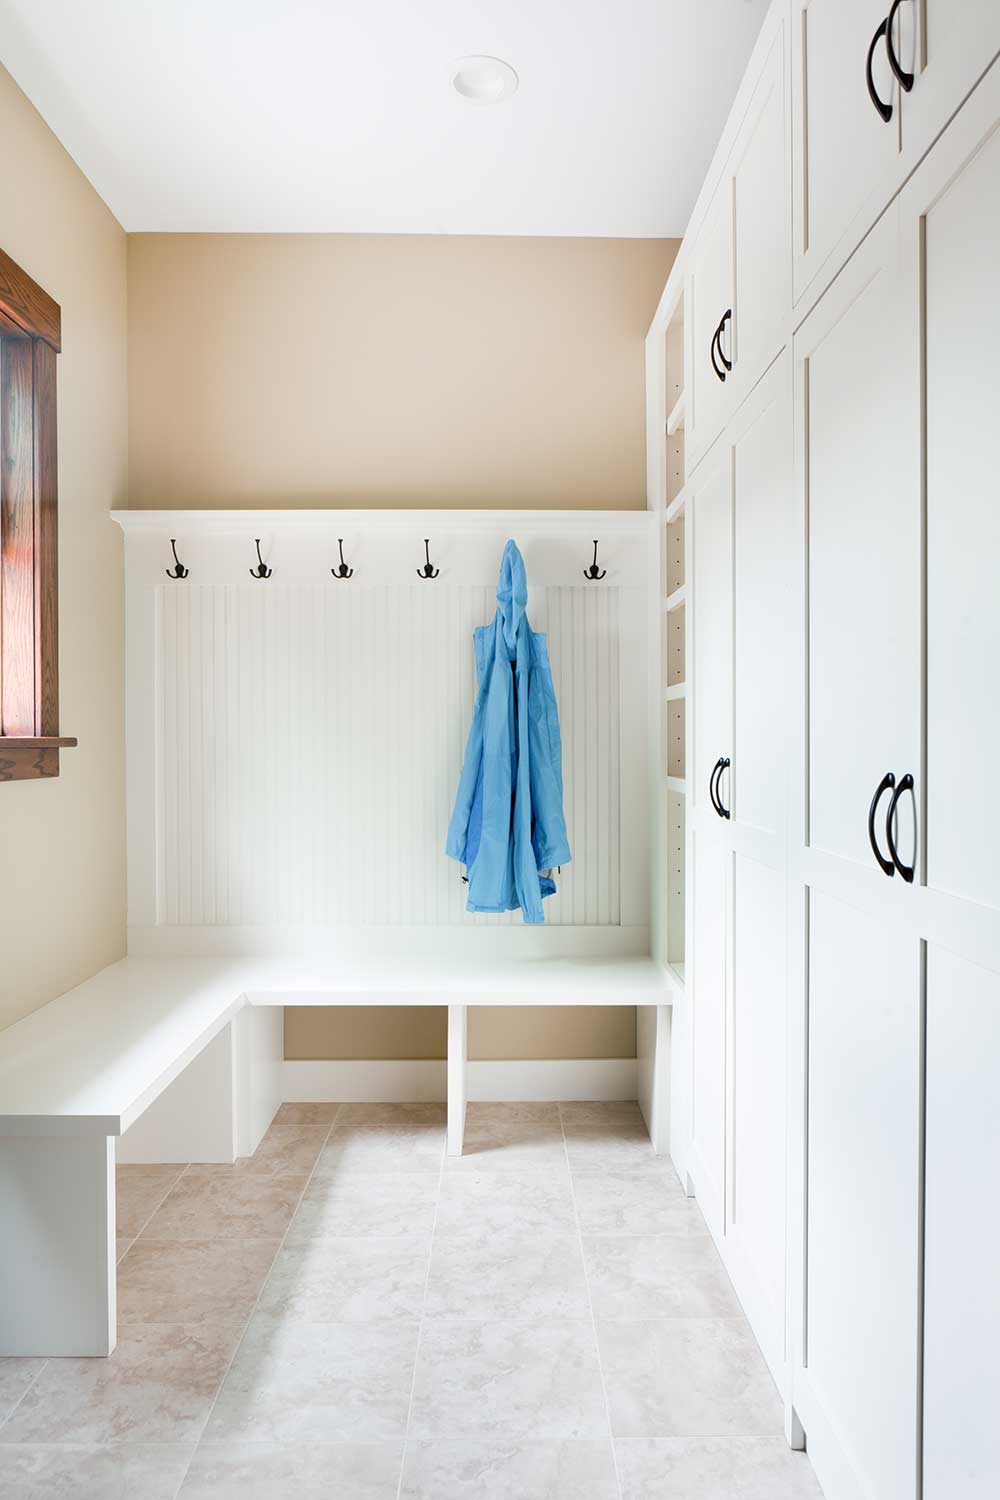 A mudroom home interior space displaying a remodeled entrance and storage room